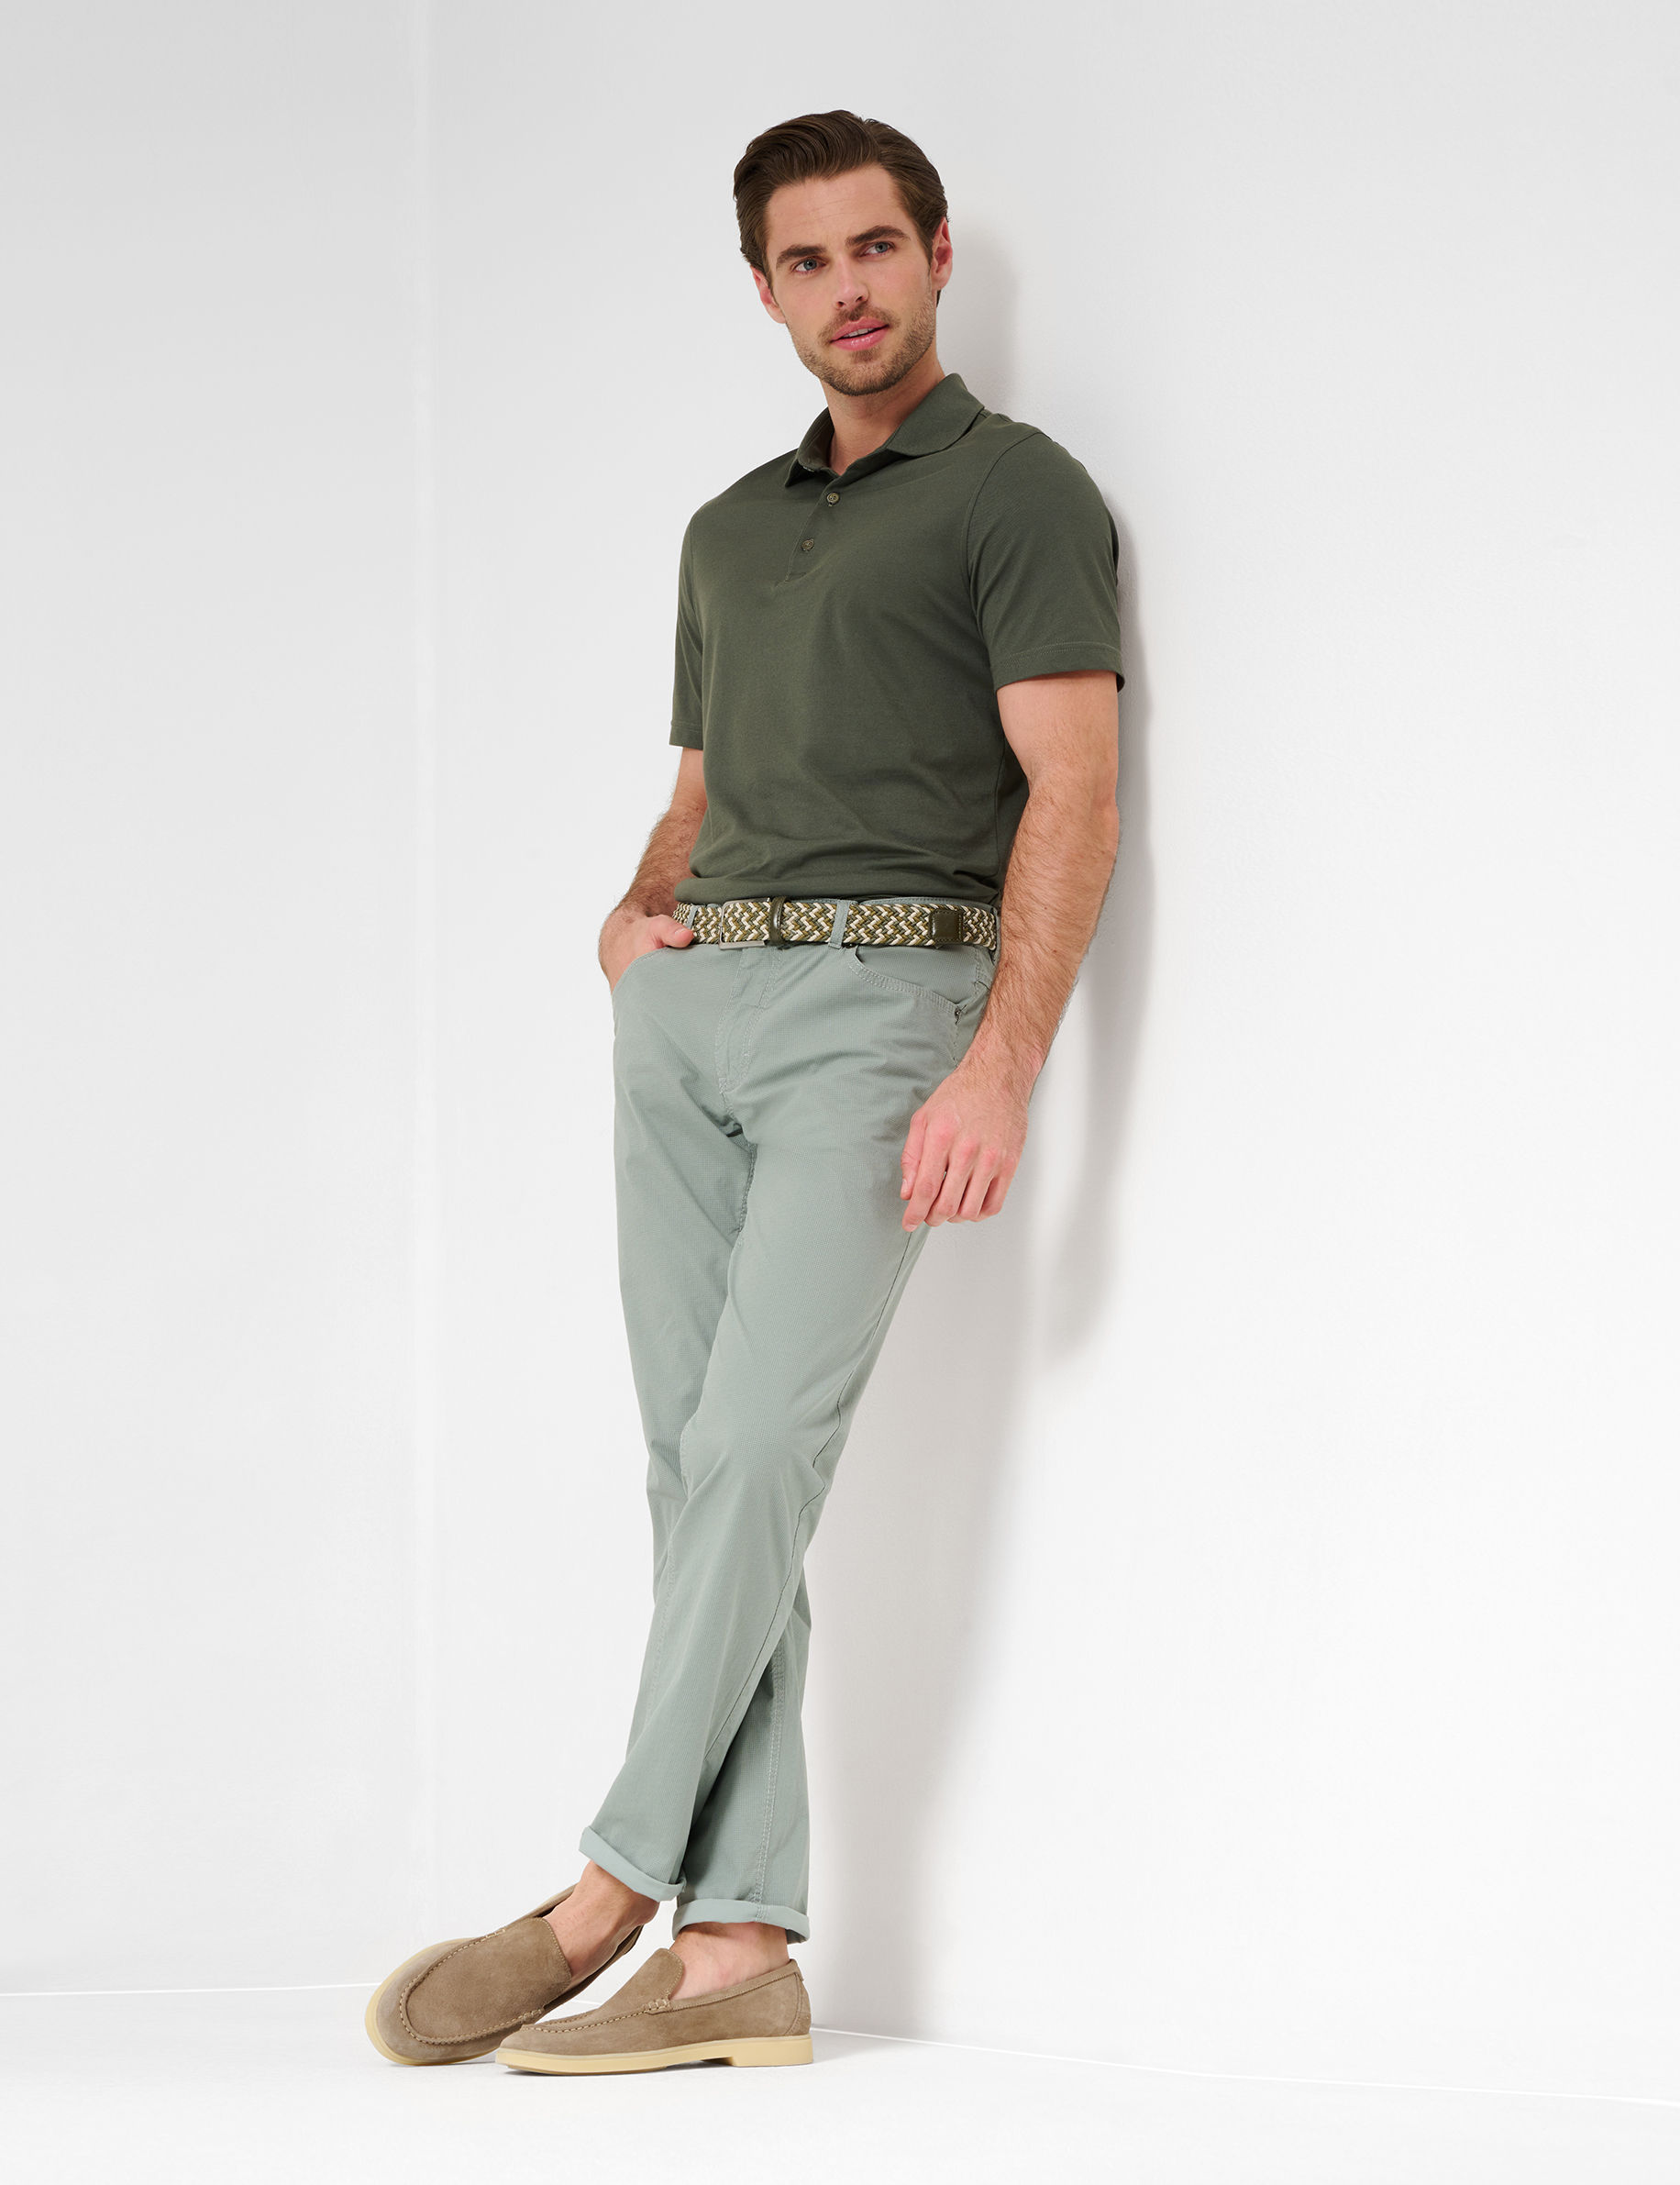 Men Style COOPER AVOCADO Regular Fit Model Outfit